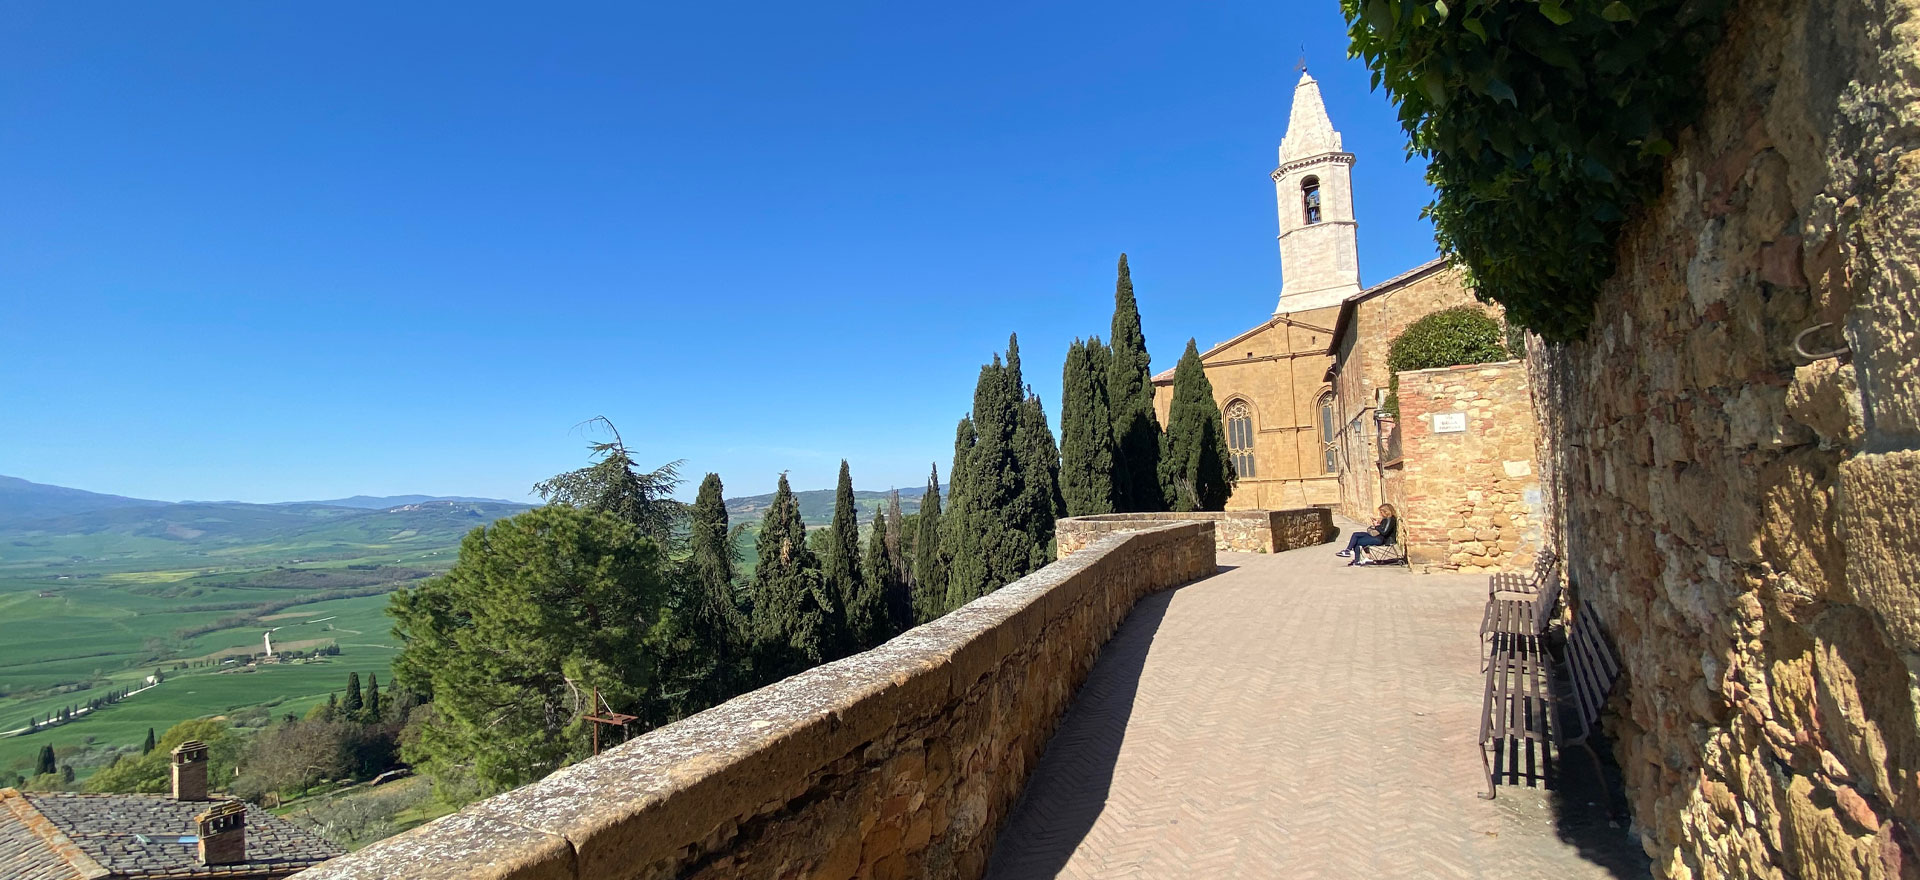 The view in Pienza